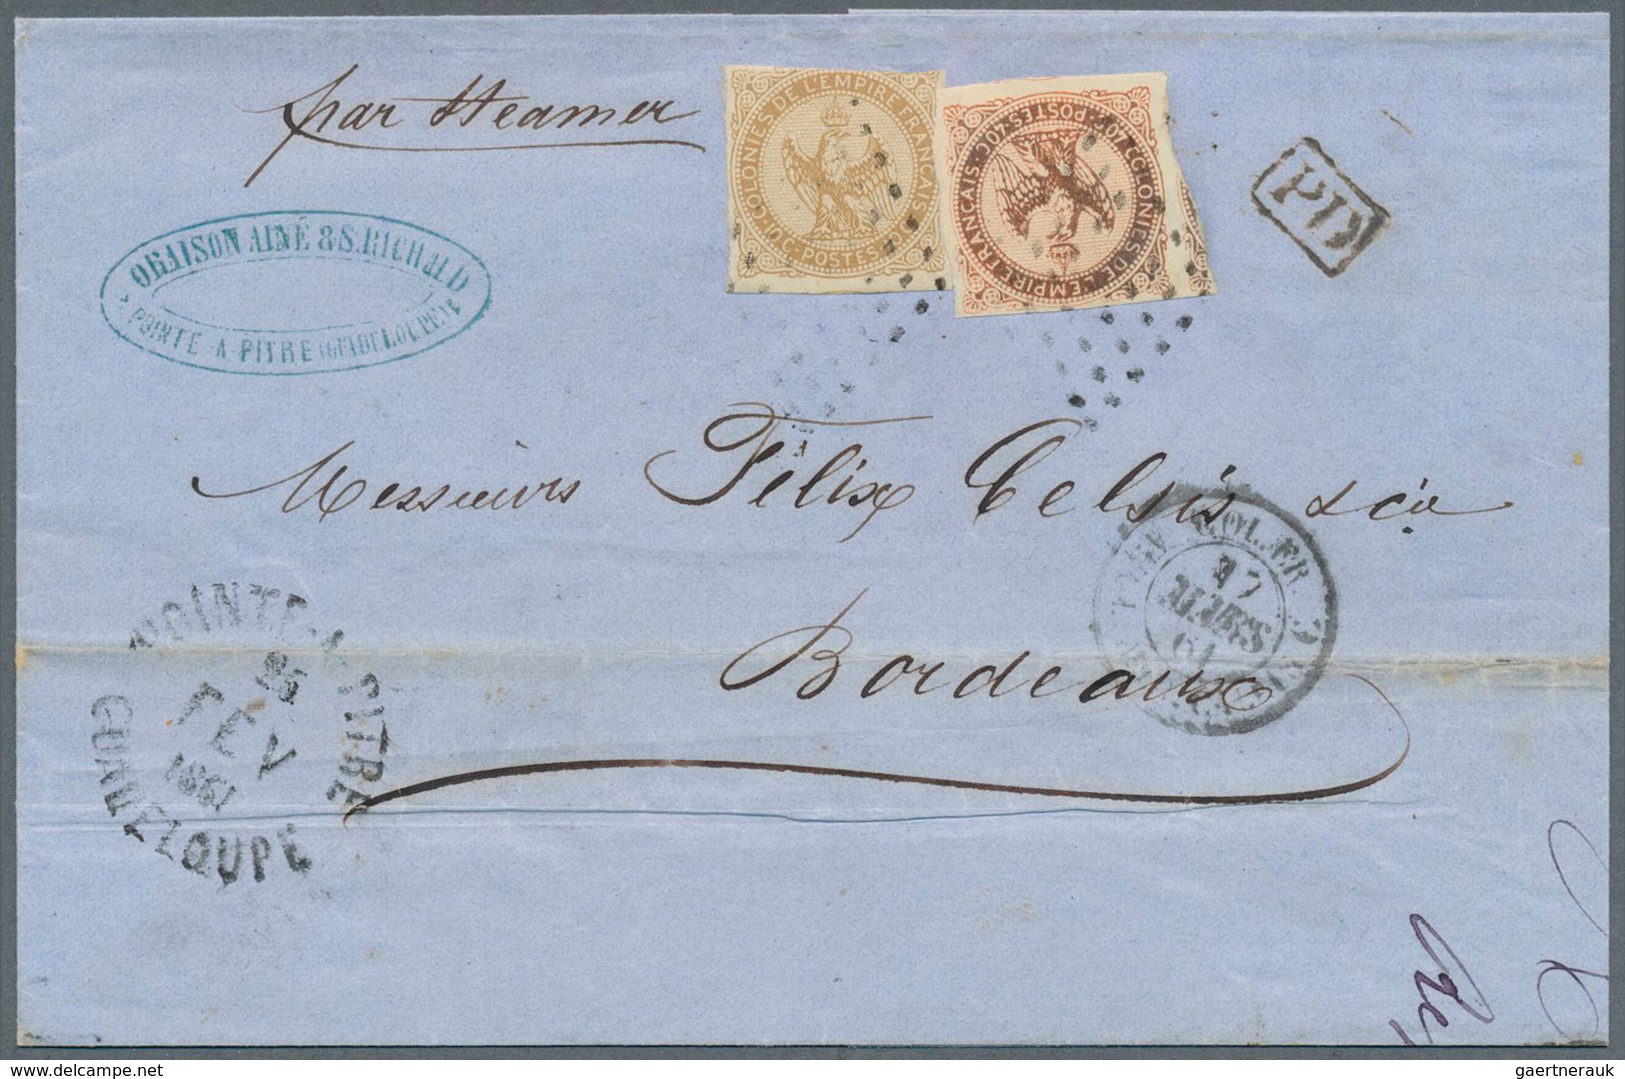 22638 Guadeloupe: 1837/1913, collection of apprx. 90 entires from a nice selection of pre-philatelic/stamp